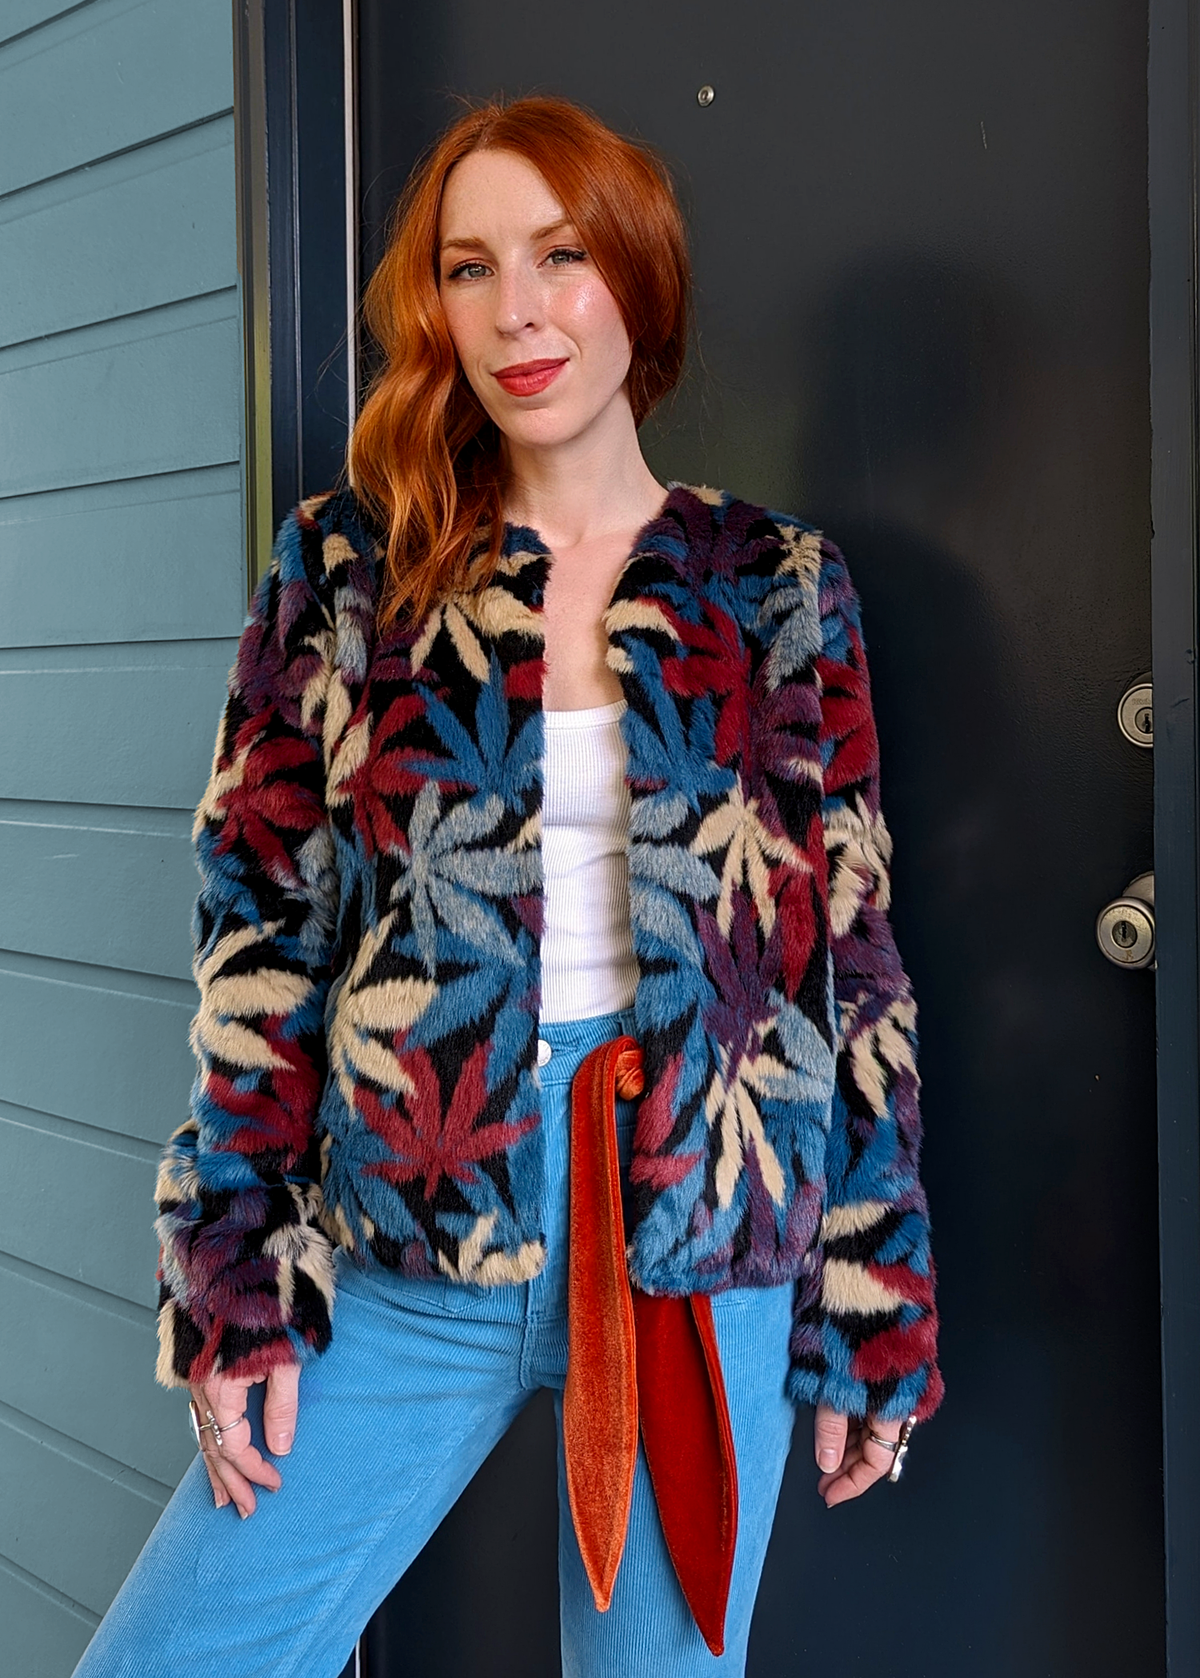 70s inspired faux fur jacket coat with colorful pot leaf design allover in teal, blue, maroon, purple, beige, and black. Open front with a collarless style. 